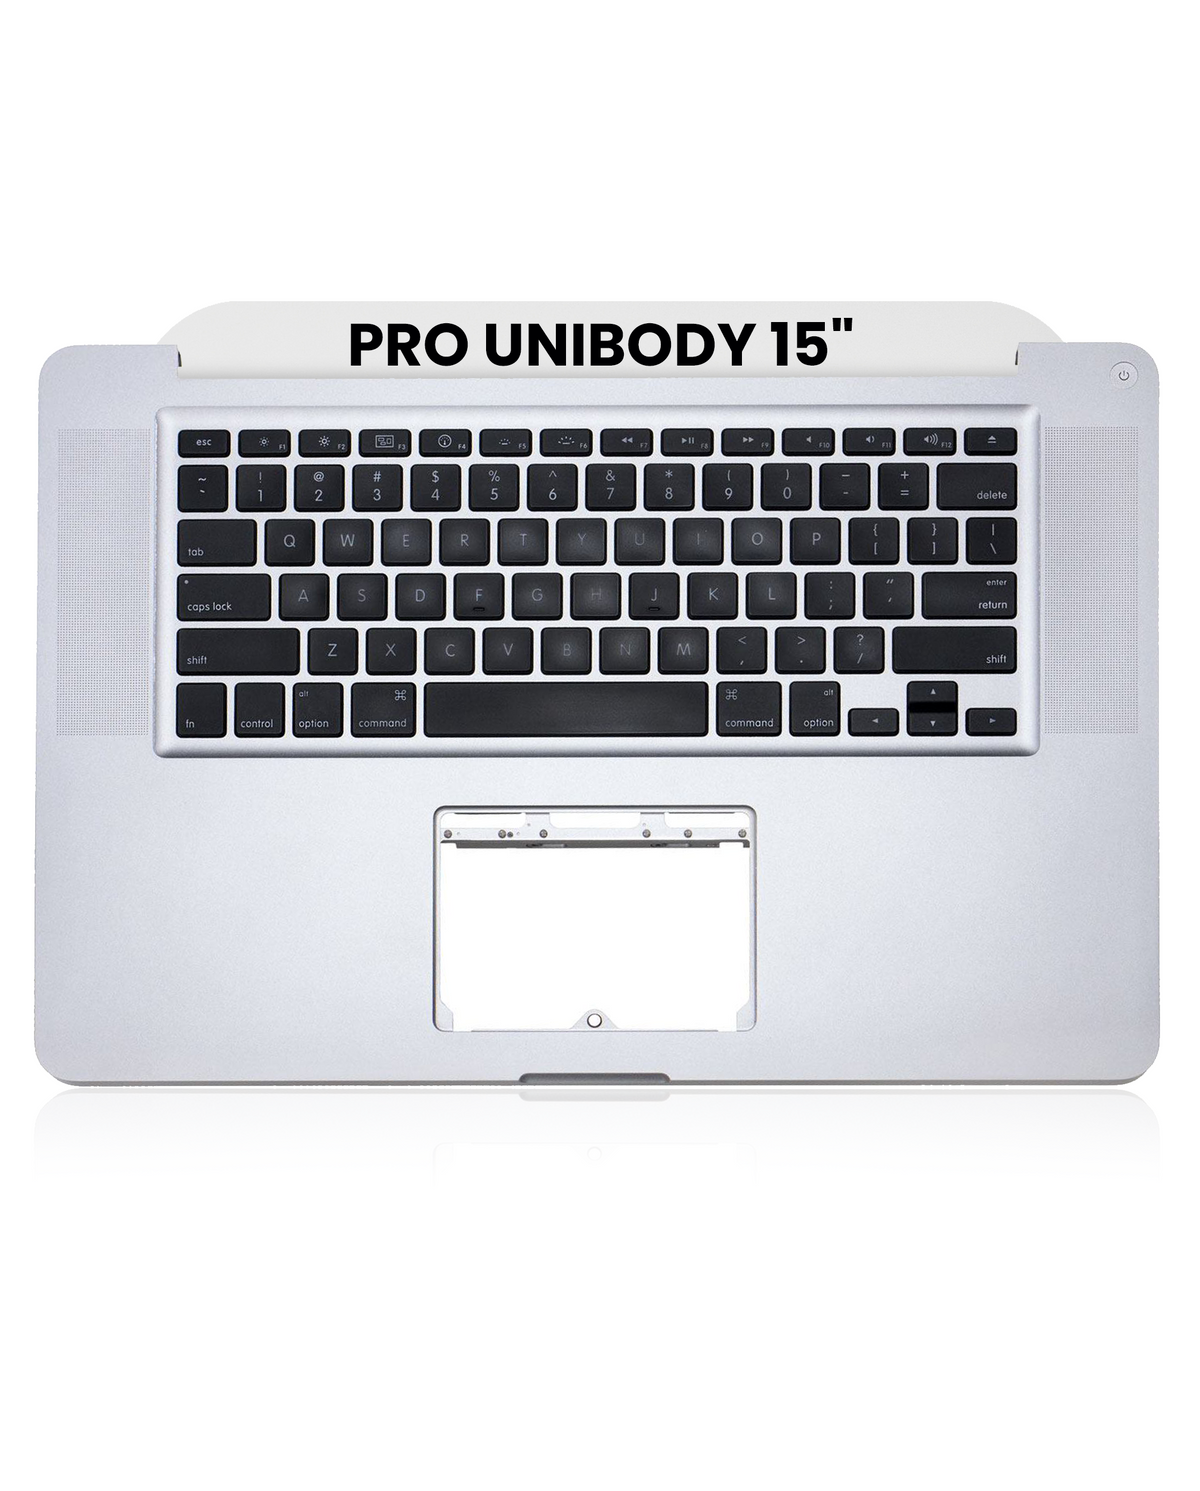 TOP CASE AND KEYBOARD (US ENGLISH) FOR MACBOOK PRO UNIBODY 15" A1286 (LATE 2008)